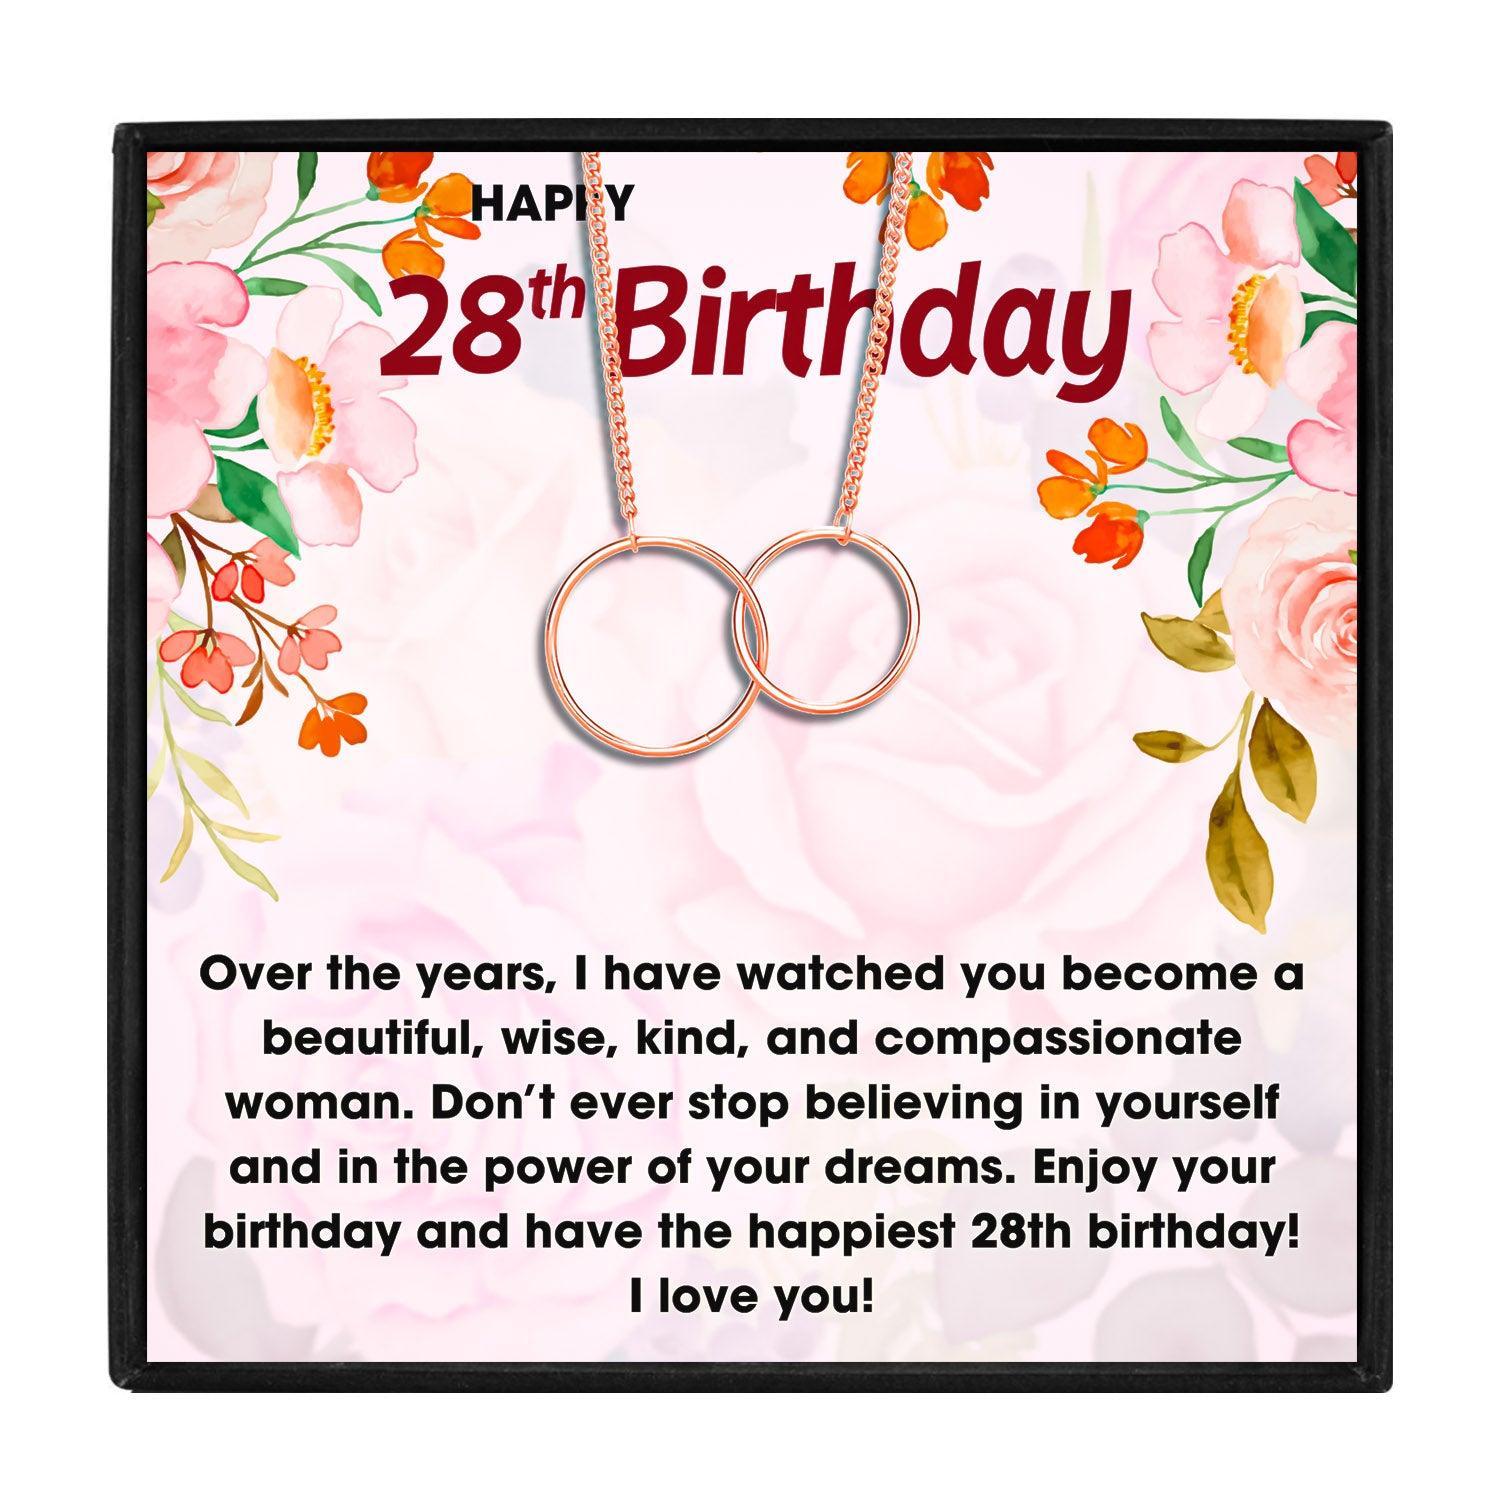 28th Birthday Gift Ideas For Her for Christmas 2023 | 28th Birthday Gift Ideas For Her - undefined | 28 birthday gift, 28th birthday ideas for her, 28th birthday present ideas for her, birthday ideas for 28 | From Hunny Life | hunnylife.com